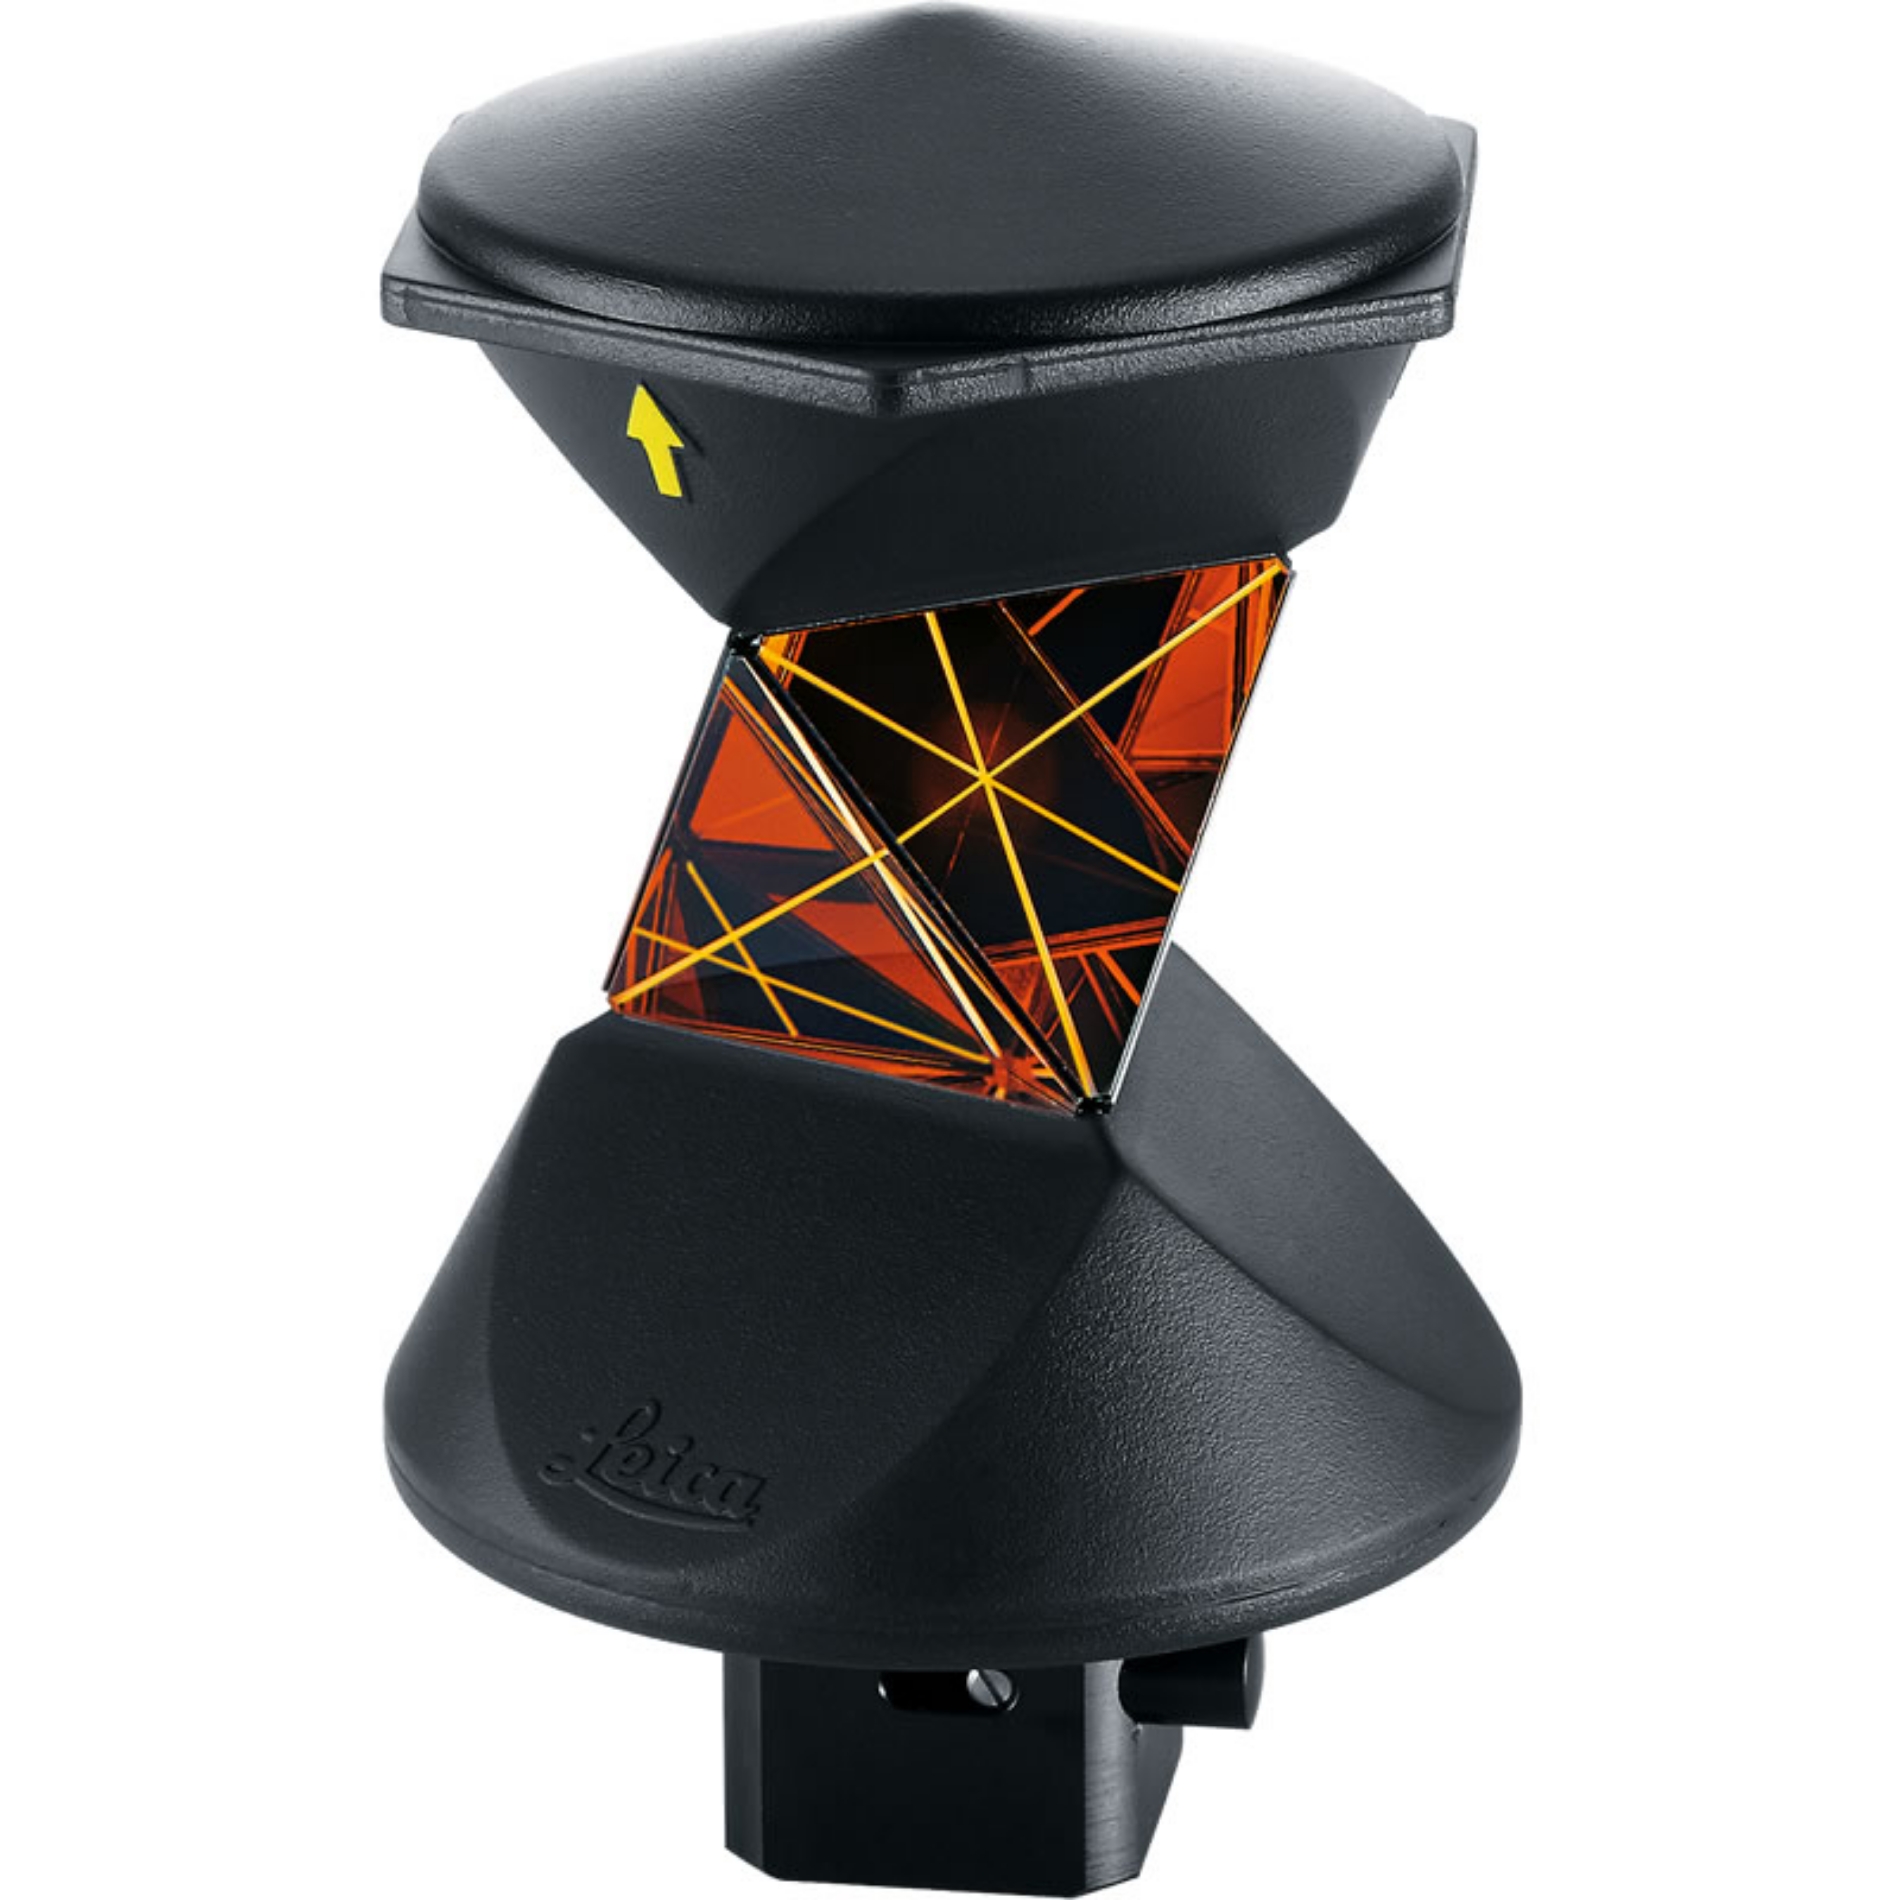 NEW High Quality prism 360° Reflective Prism For LEICA Total Stations Surveying 